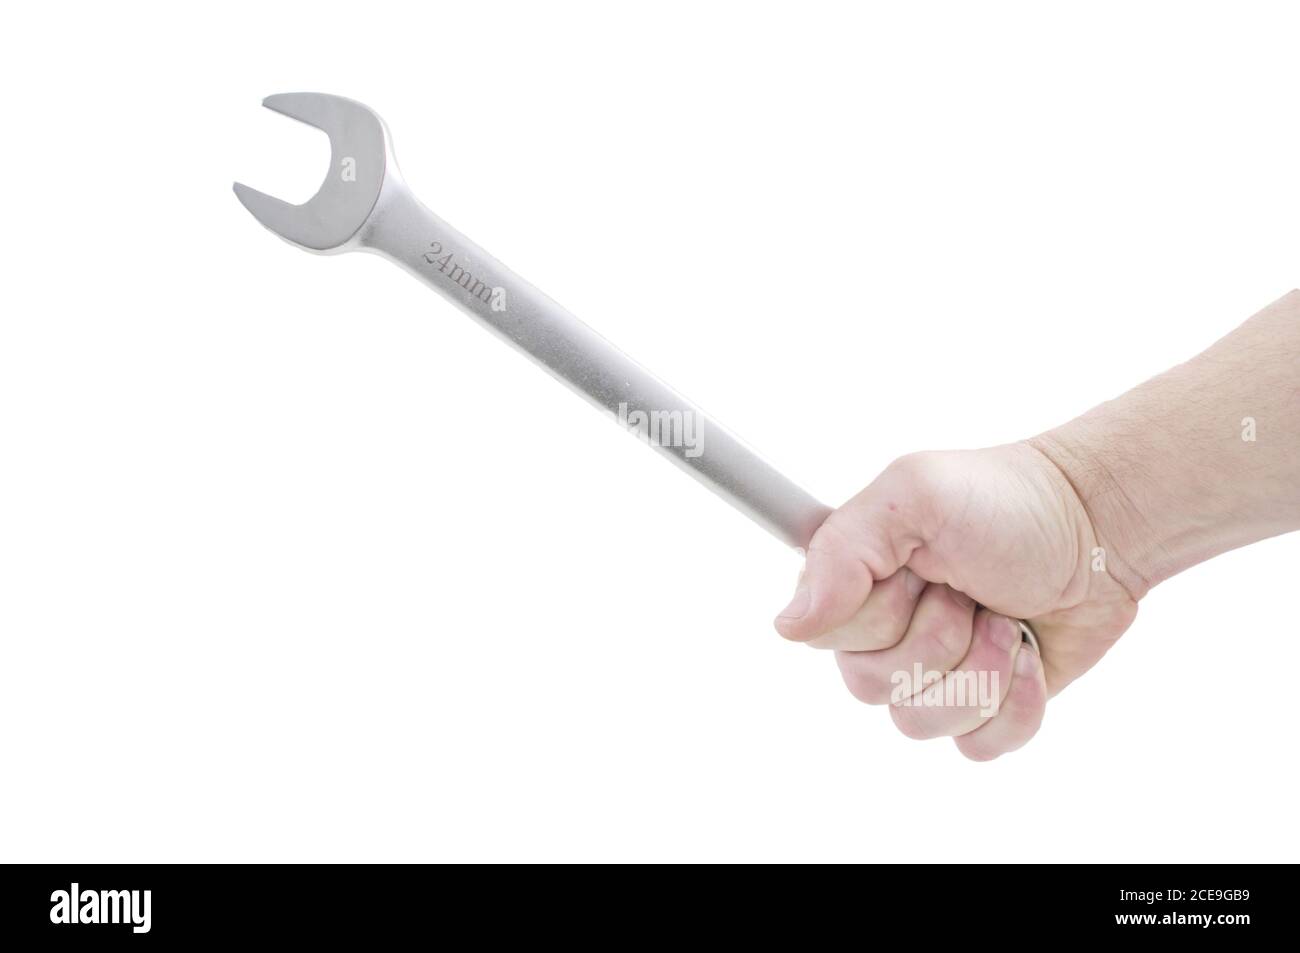 Key in a hand Stock Photo